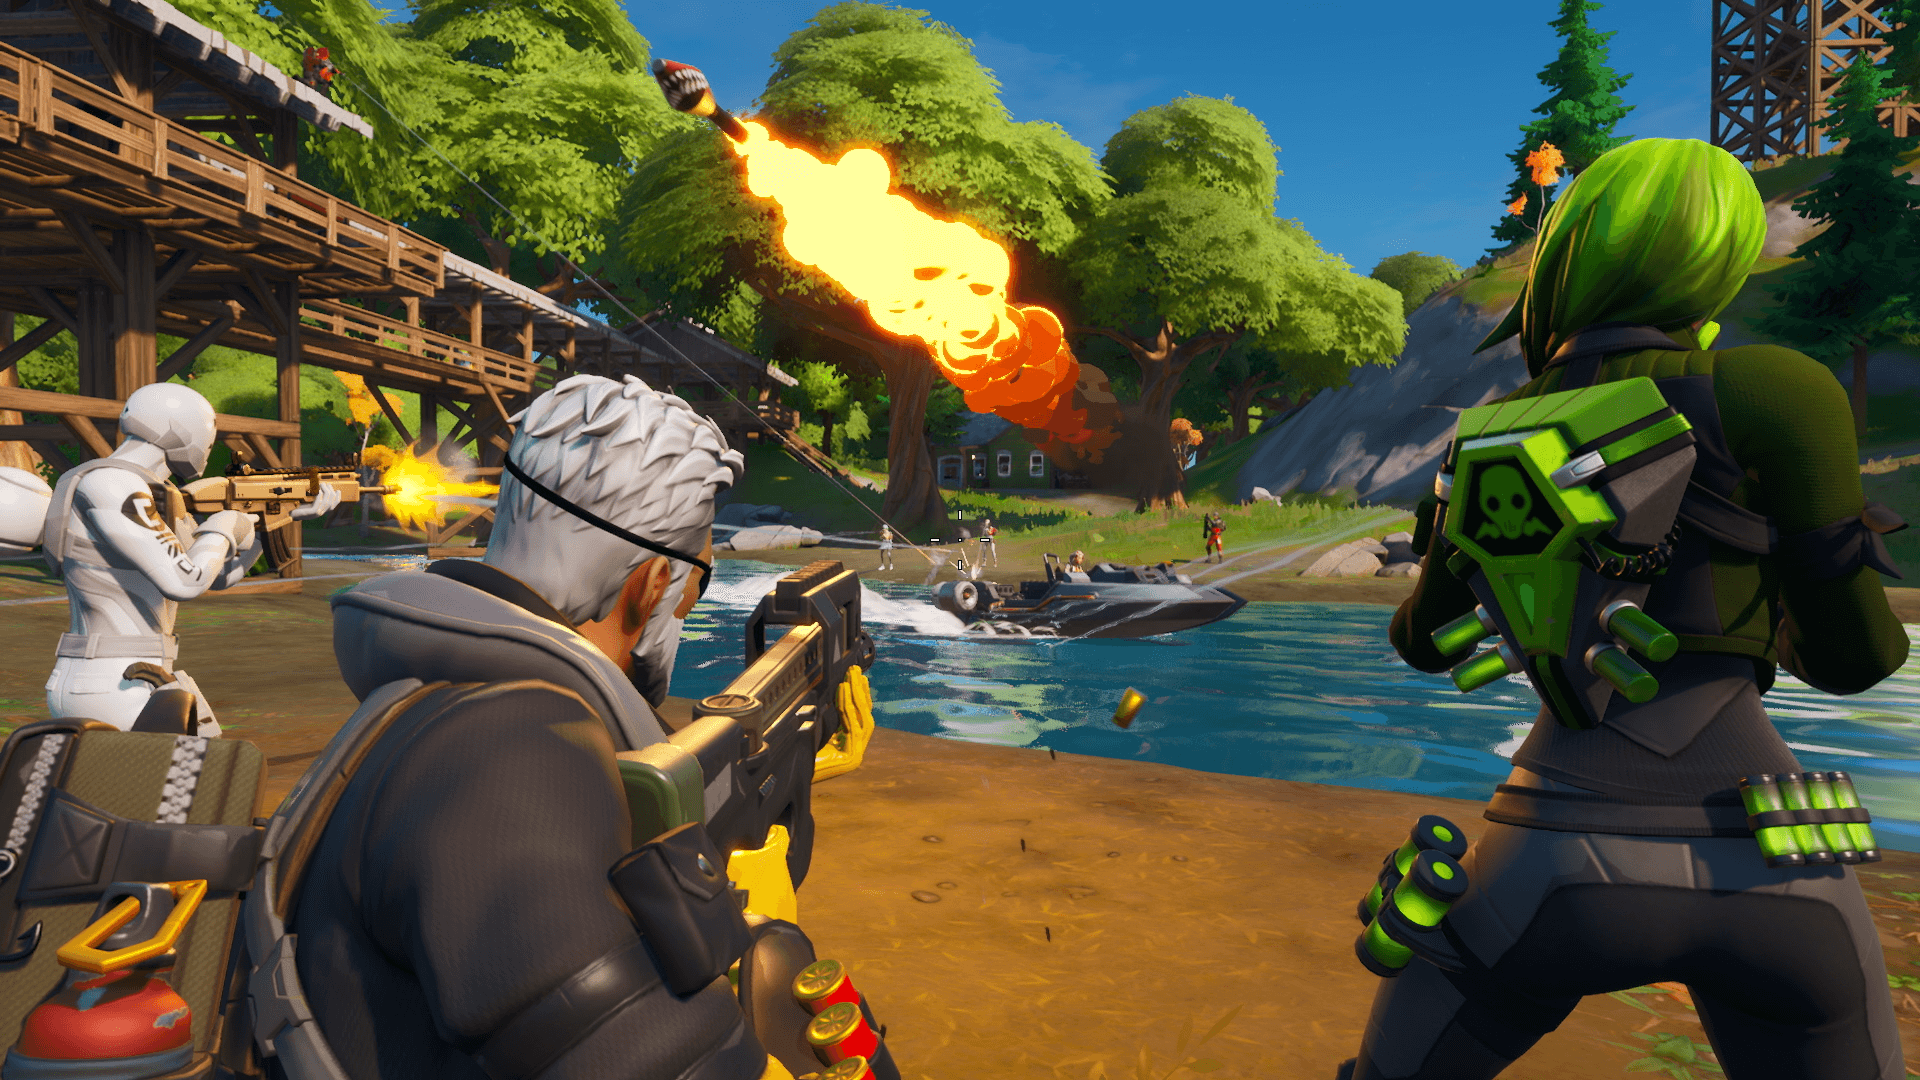 Fortnite' Chapter 2: Game Emerges From Black Hole With All